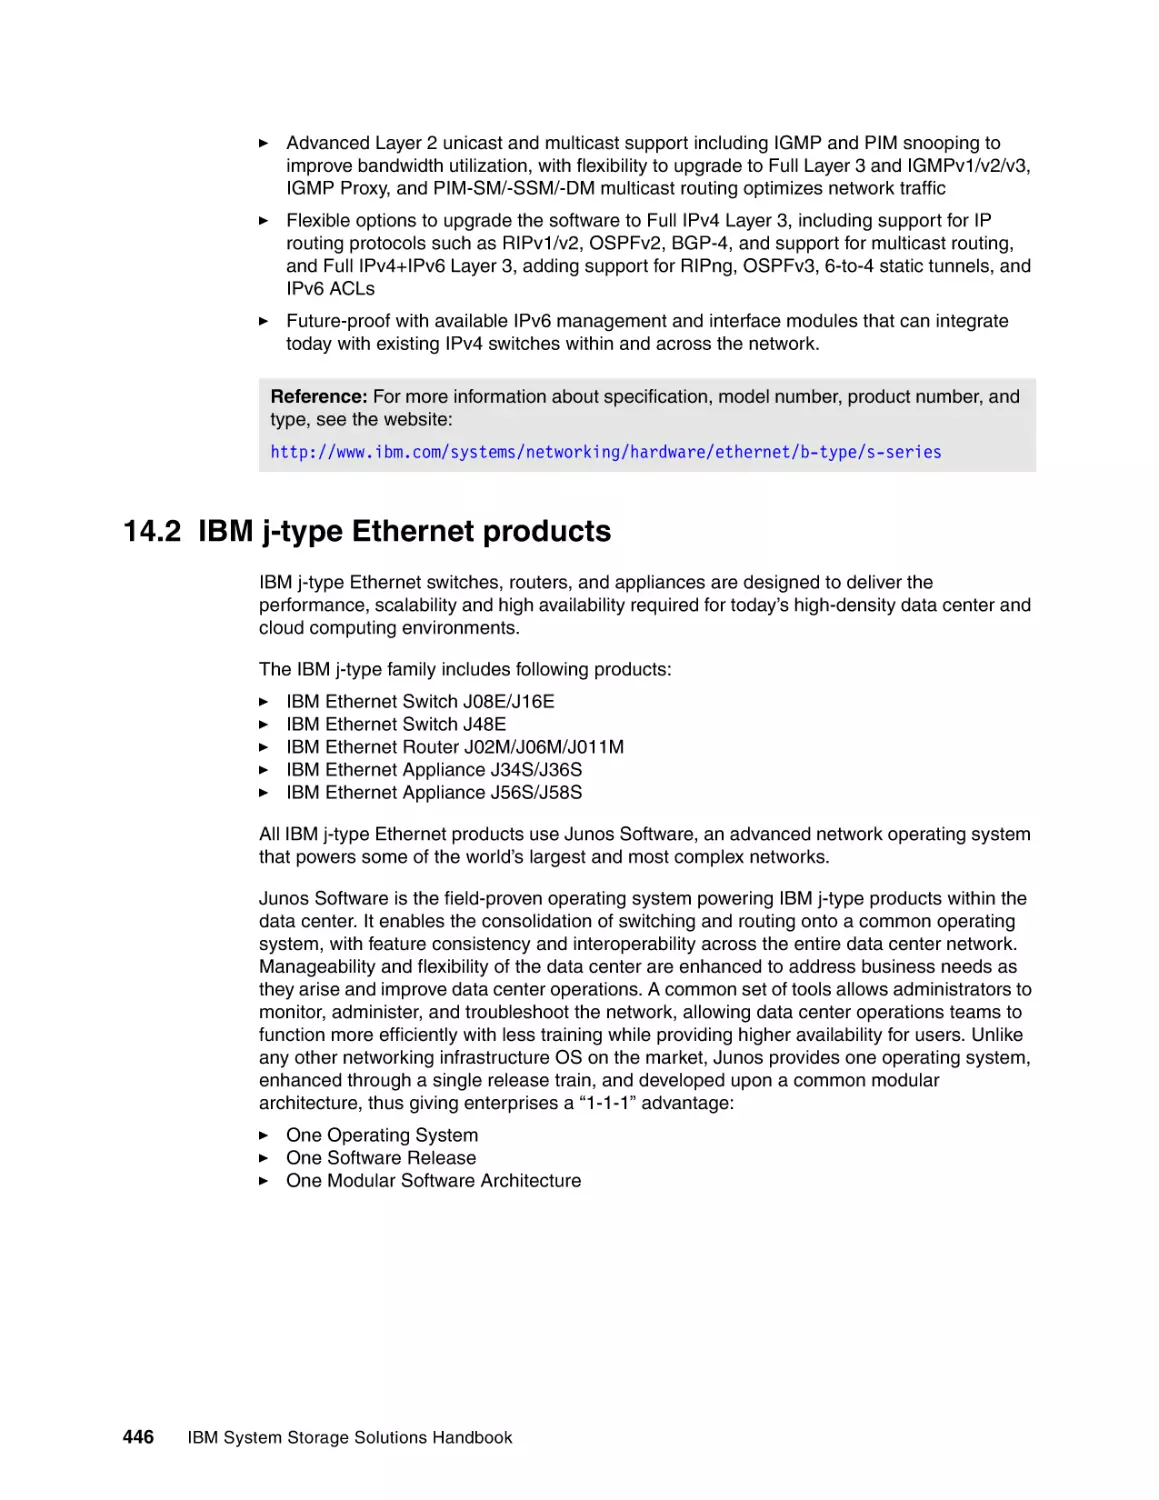 14.2 IBM j-type Ethernet products